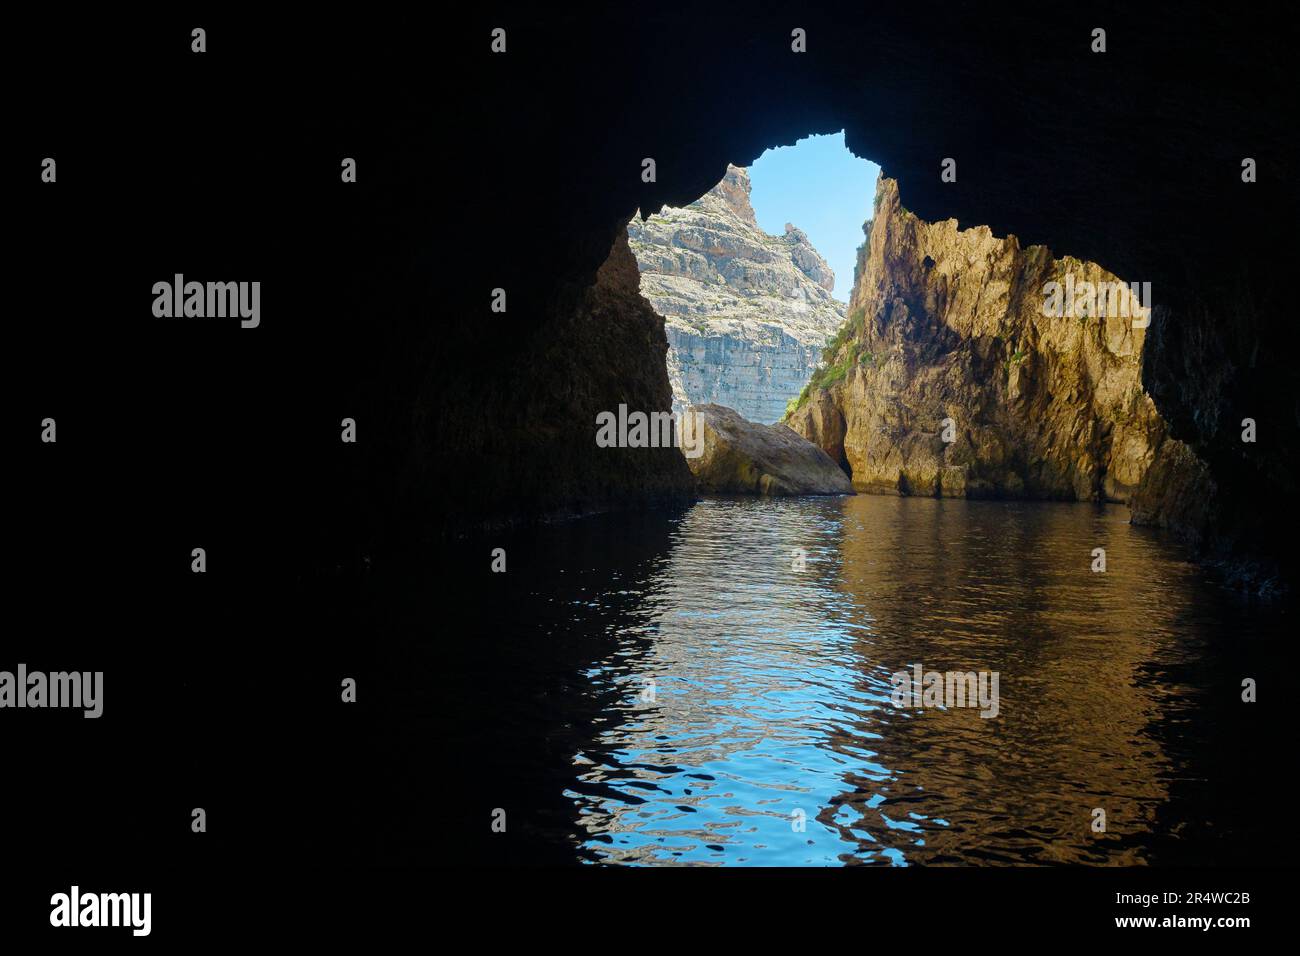 View from inside of a sea cave, the Blue Grotto cavern, a local landmark on the island of Malta. Tourism, travel, vacation and natural wonder concepts Stock Photo